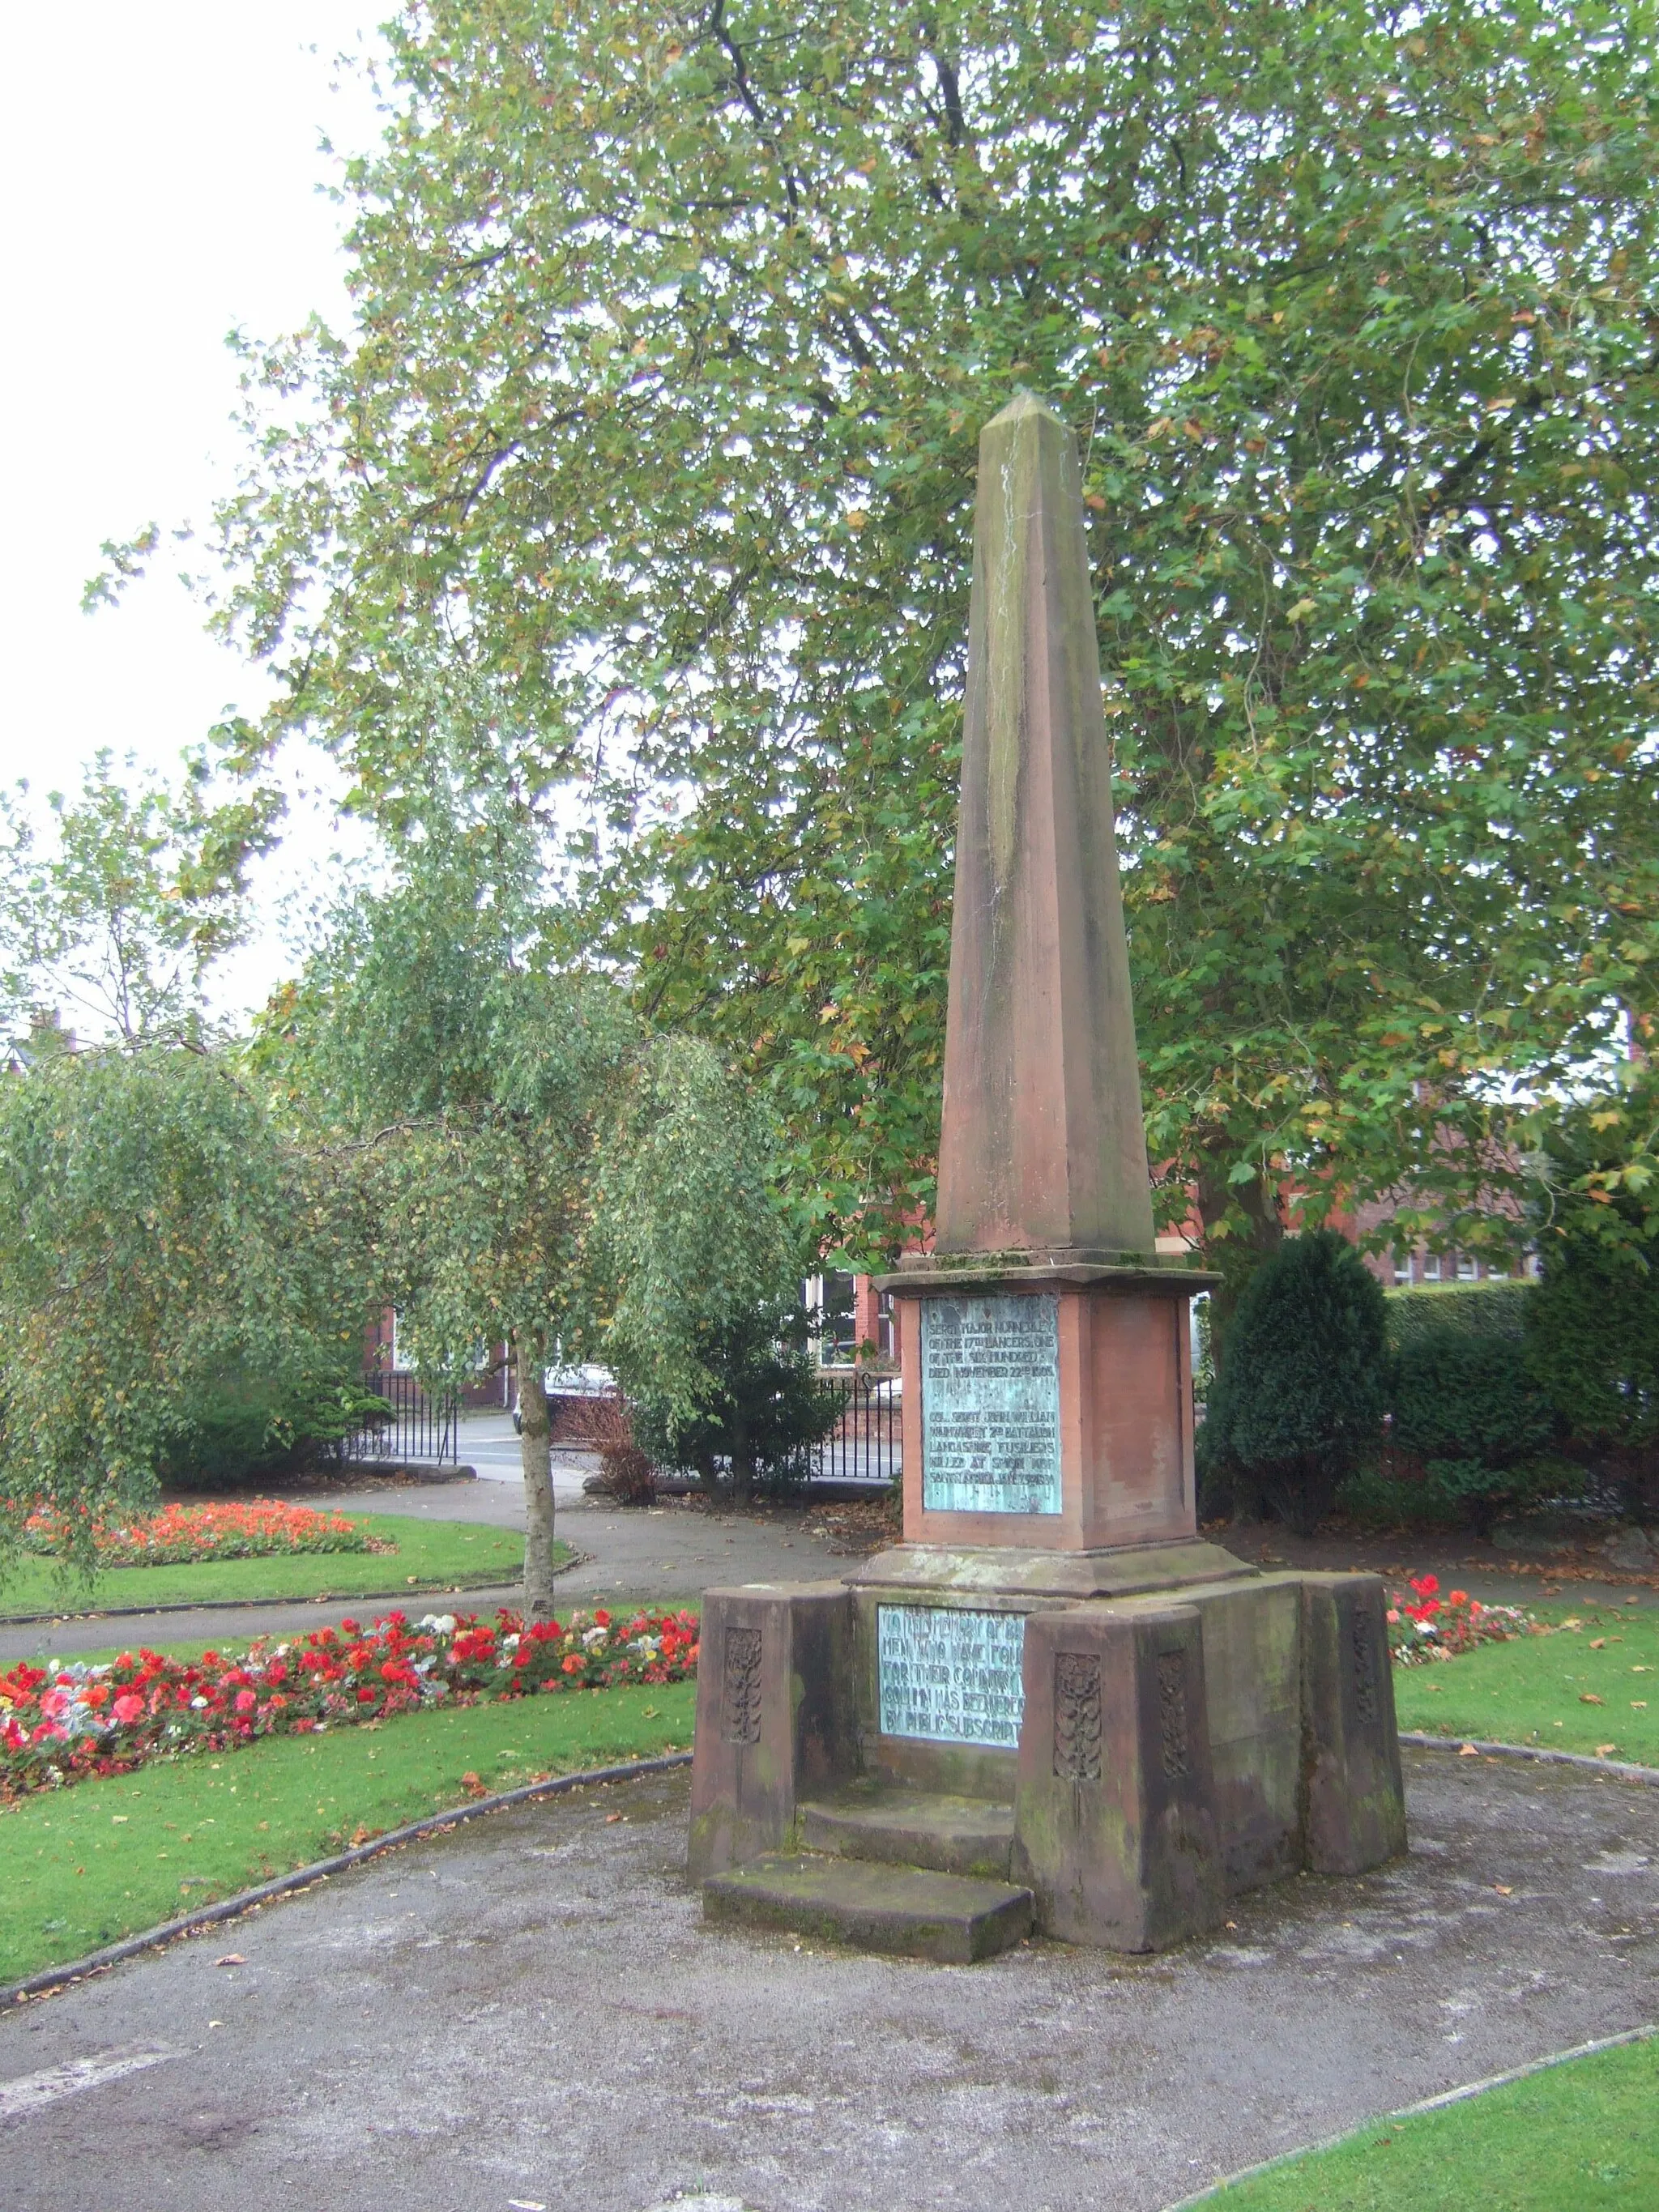 Photo showing: Memorial to Sergeant Major Nunnerley in Victoria Gardens, Ormskirk, Lancashire. A local hero, Nunnerley participated in and survived the Charge of the Light Brigade, before returning to Ormskirk where he ran a draper's shop.